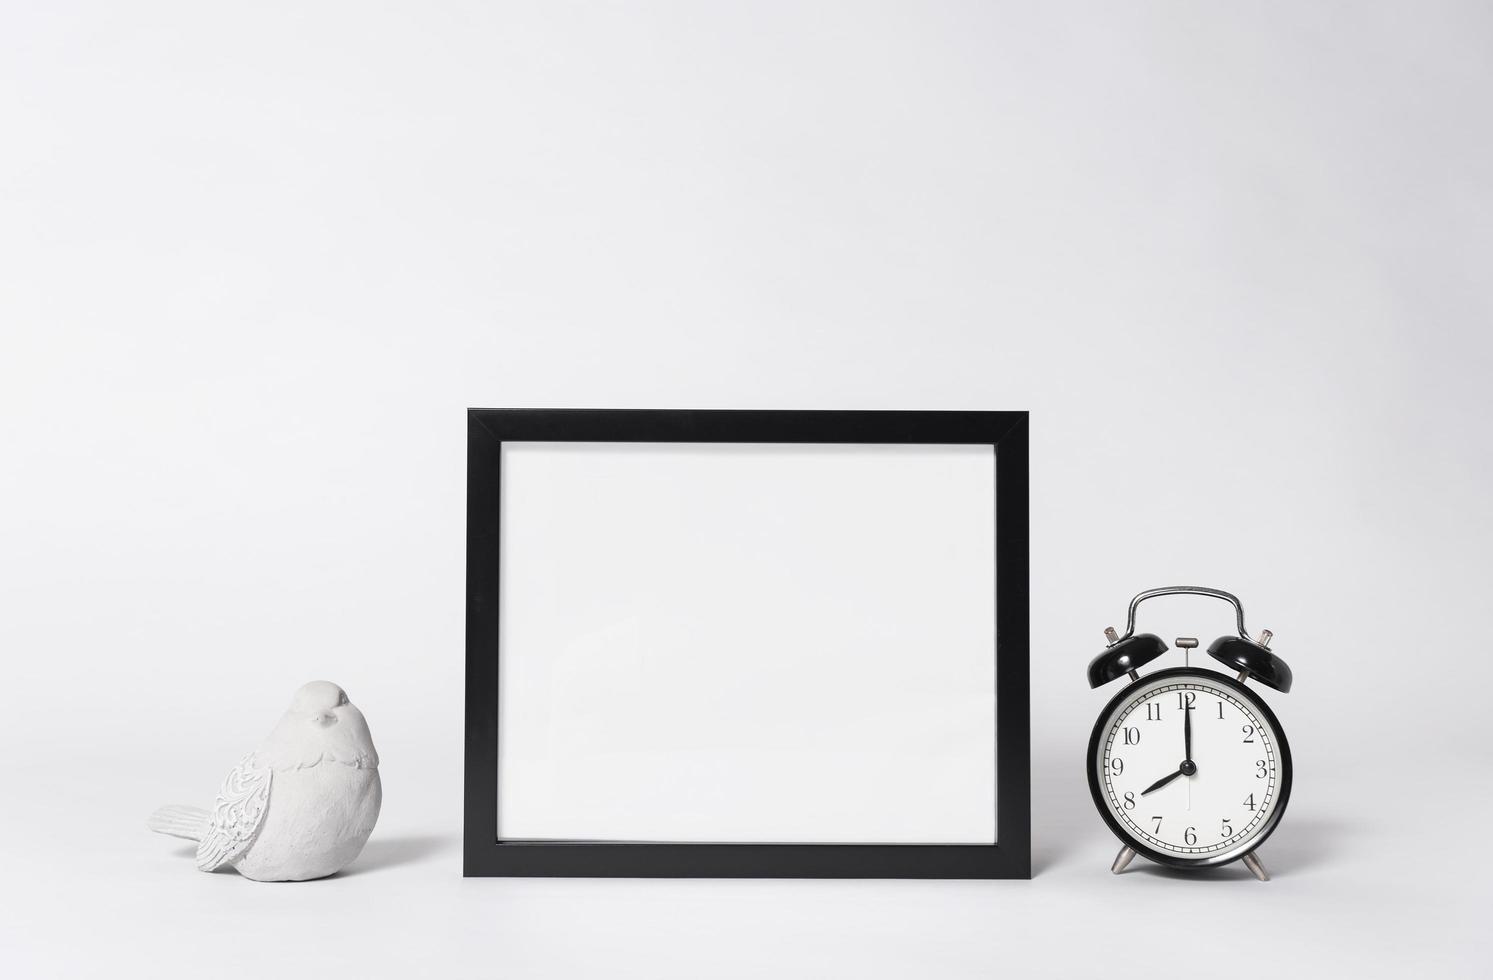 photo frame mock up and clock Interior decor home elements.